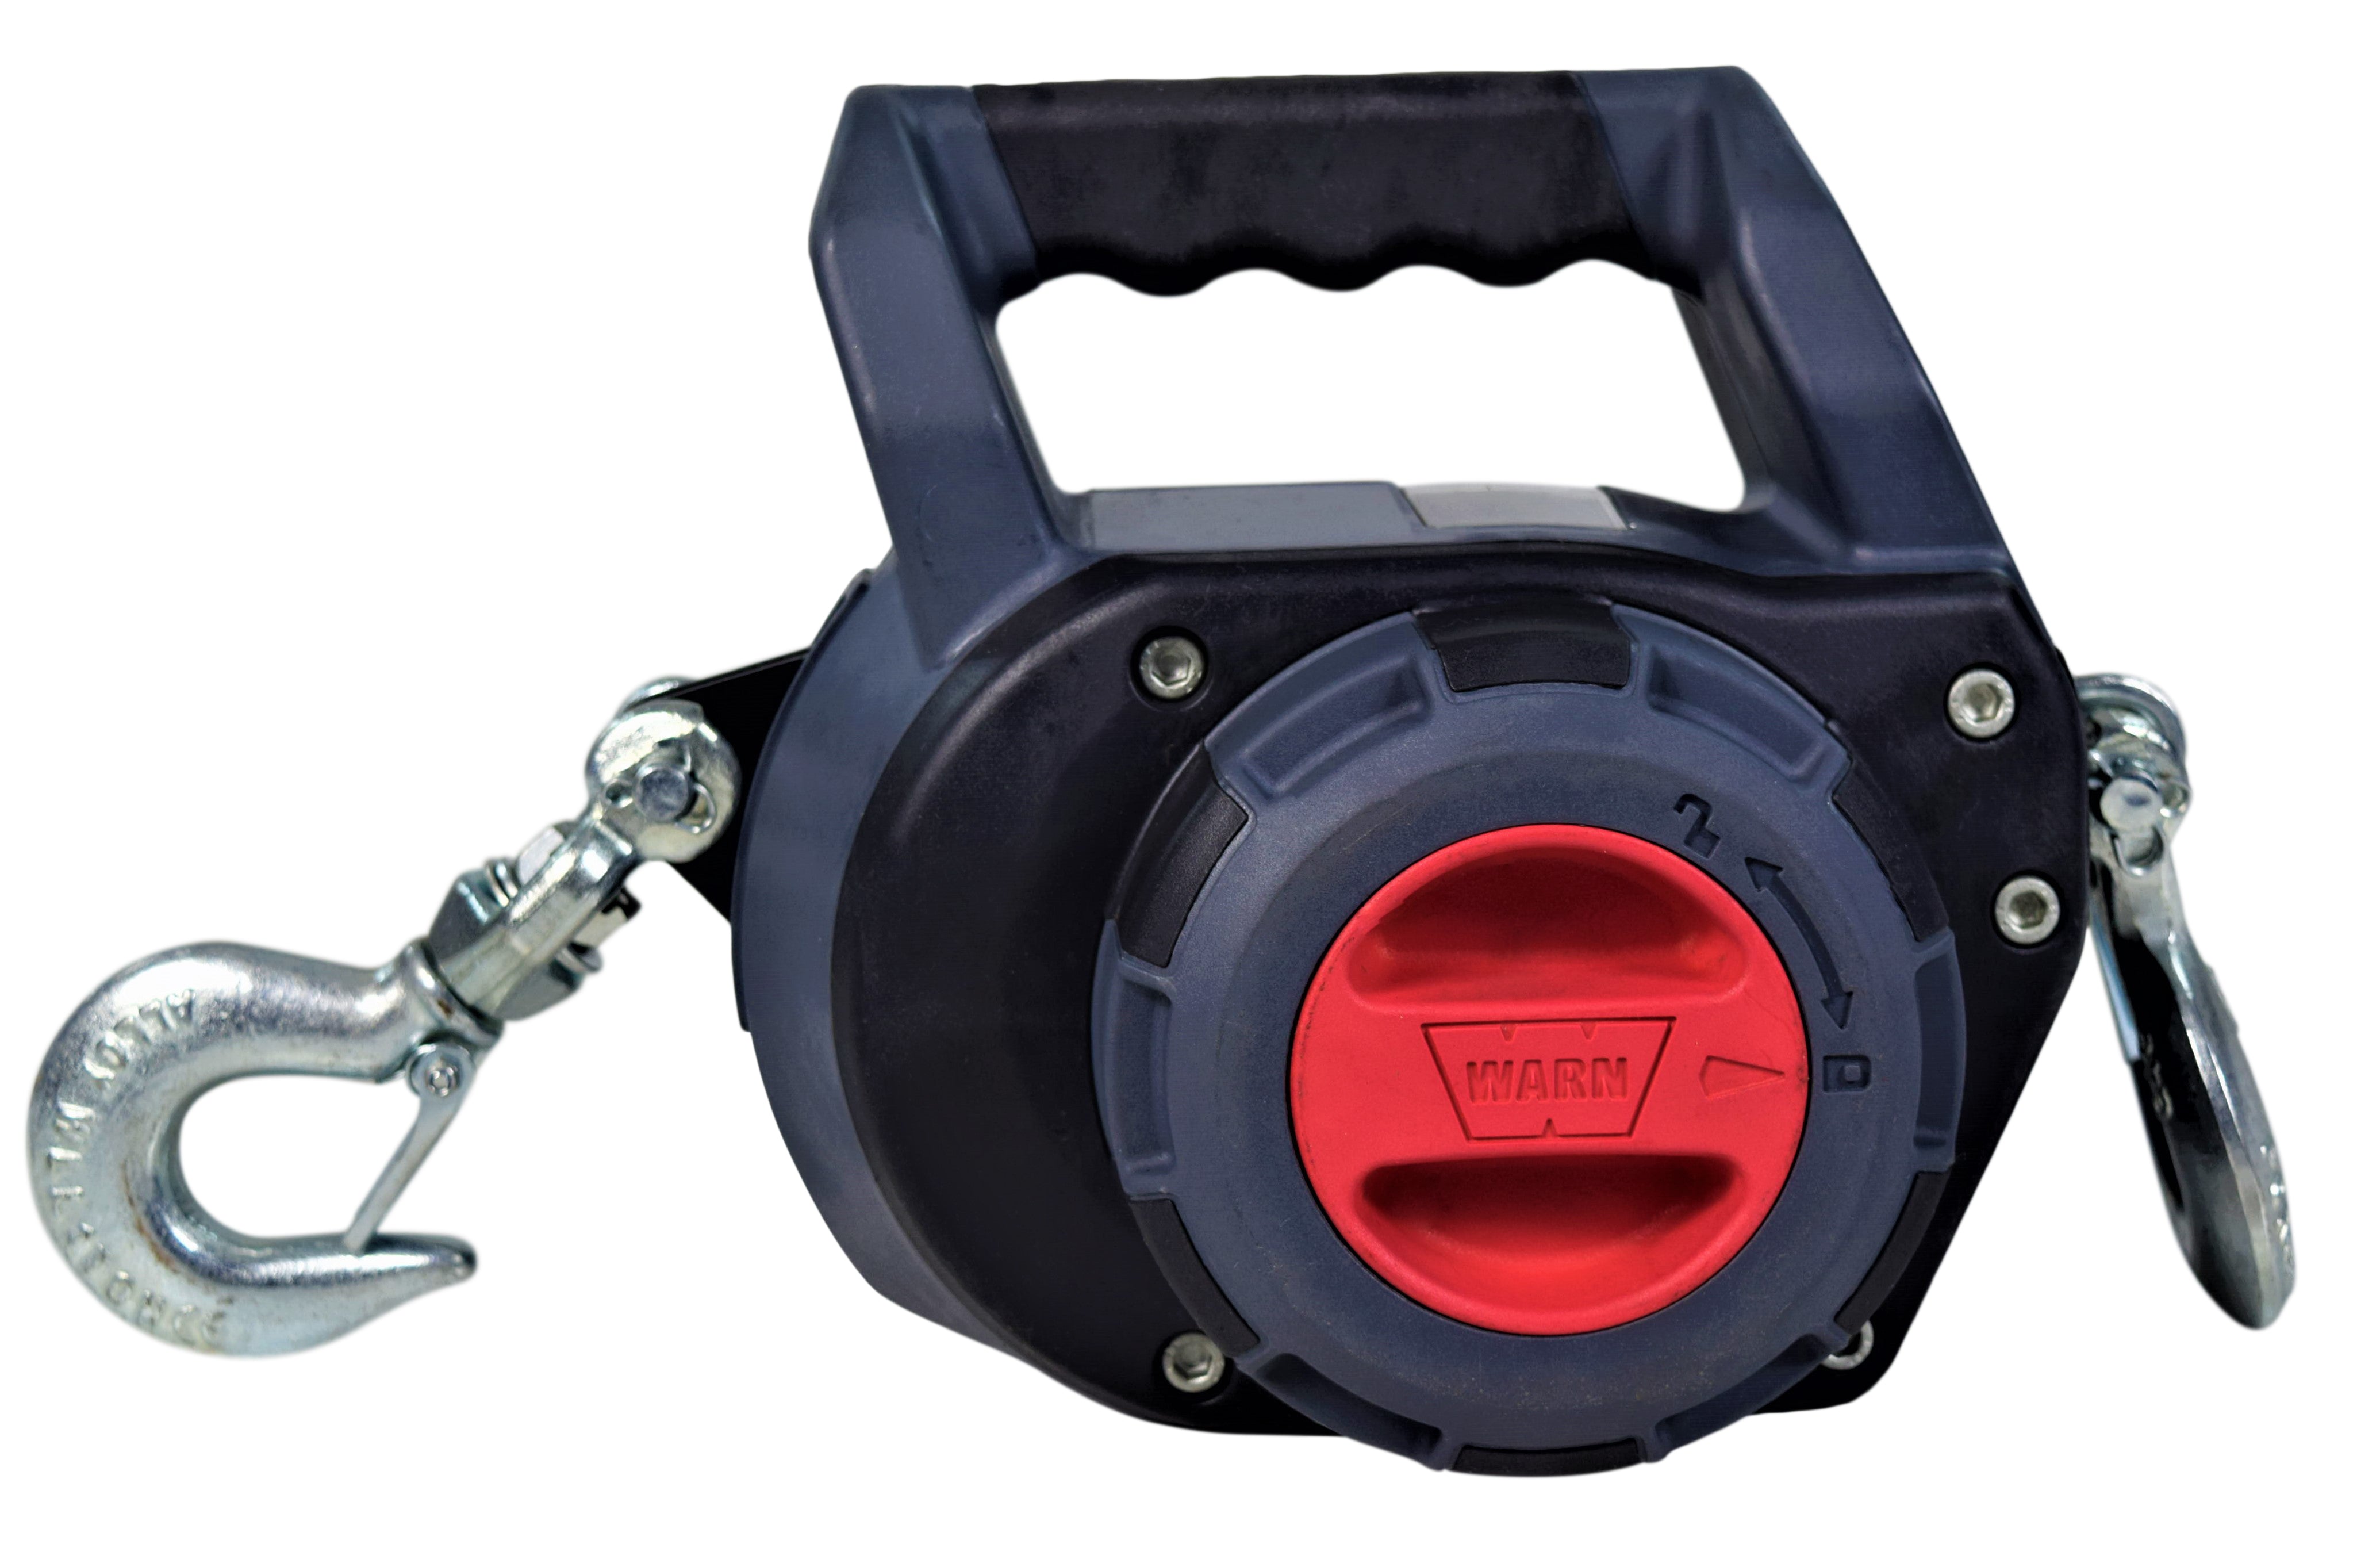 Warn 101575 Drill Winch 750 lbs Capacity 40' Synthetic Rope Free-spool Clutch